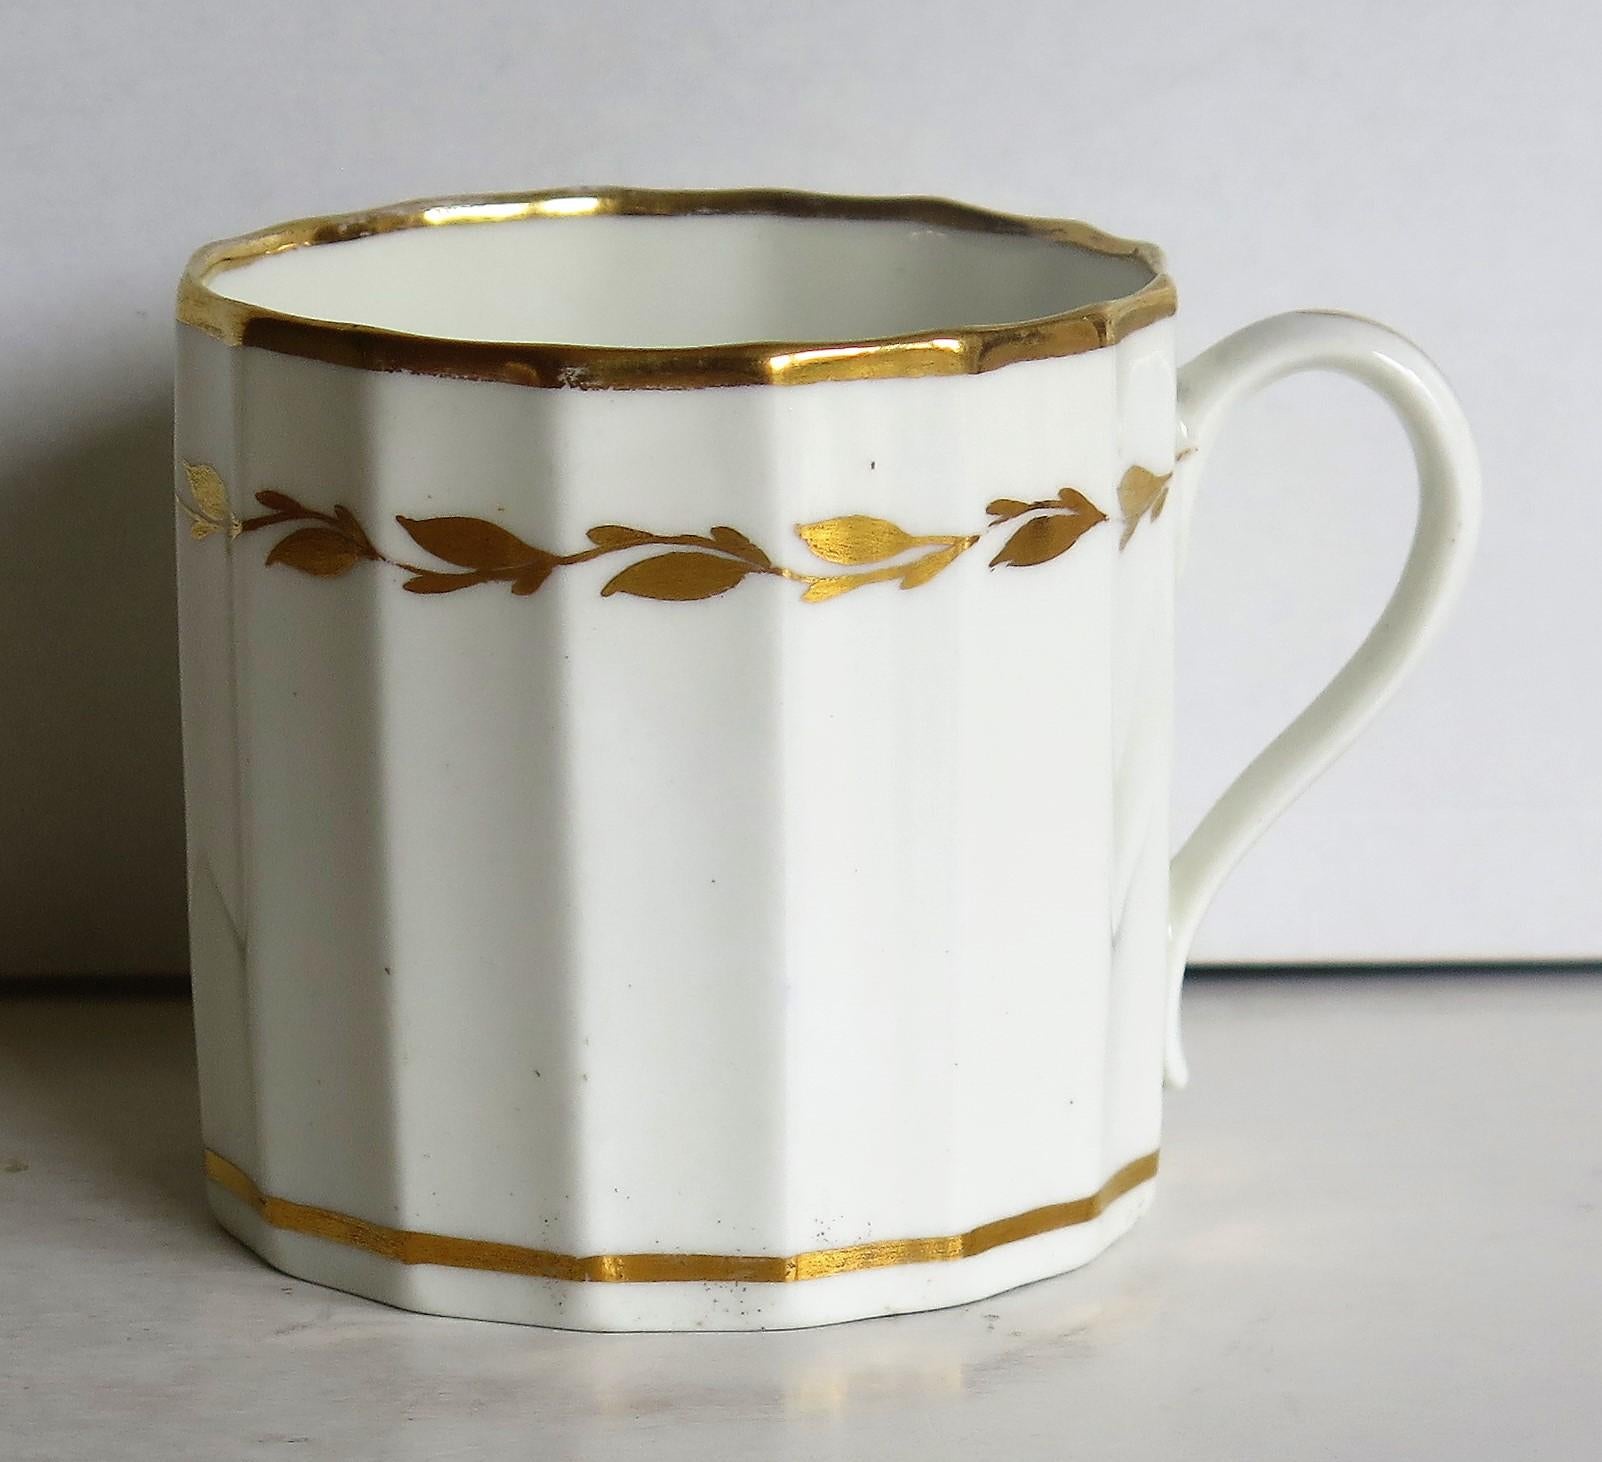 This is a rare and very collectable, hand-painted porcelain coffee can (cup), made by Derby Porcelain Co., England in the late 18th century, George III period, circa 1790.

The coffee can has a nominally straight sided body with 16 vertical concave